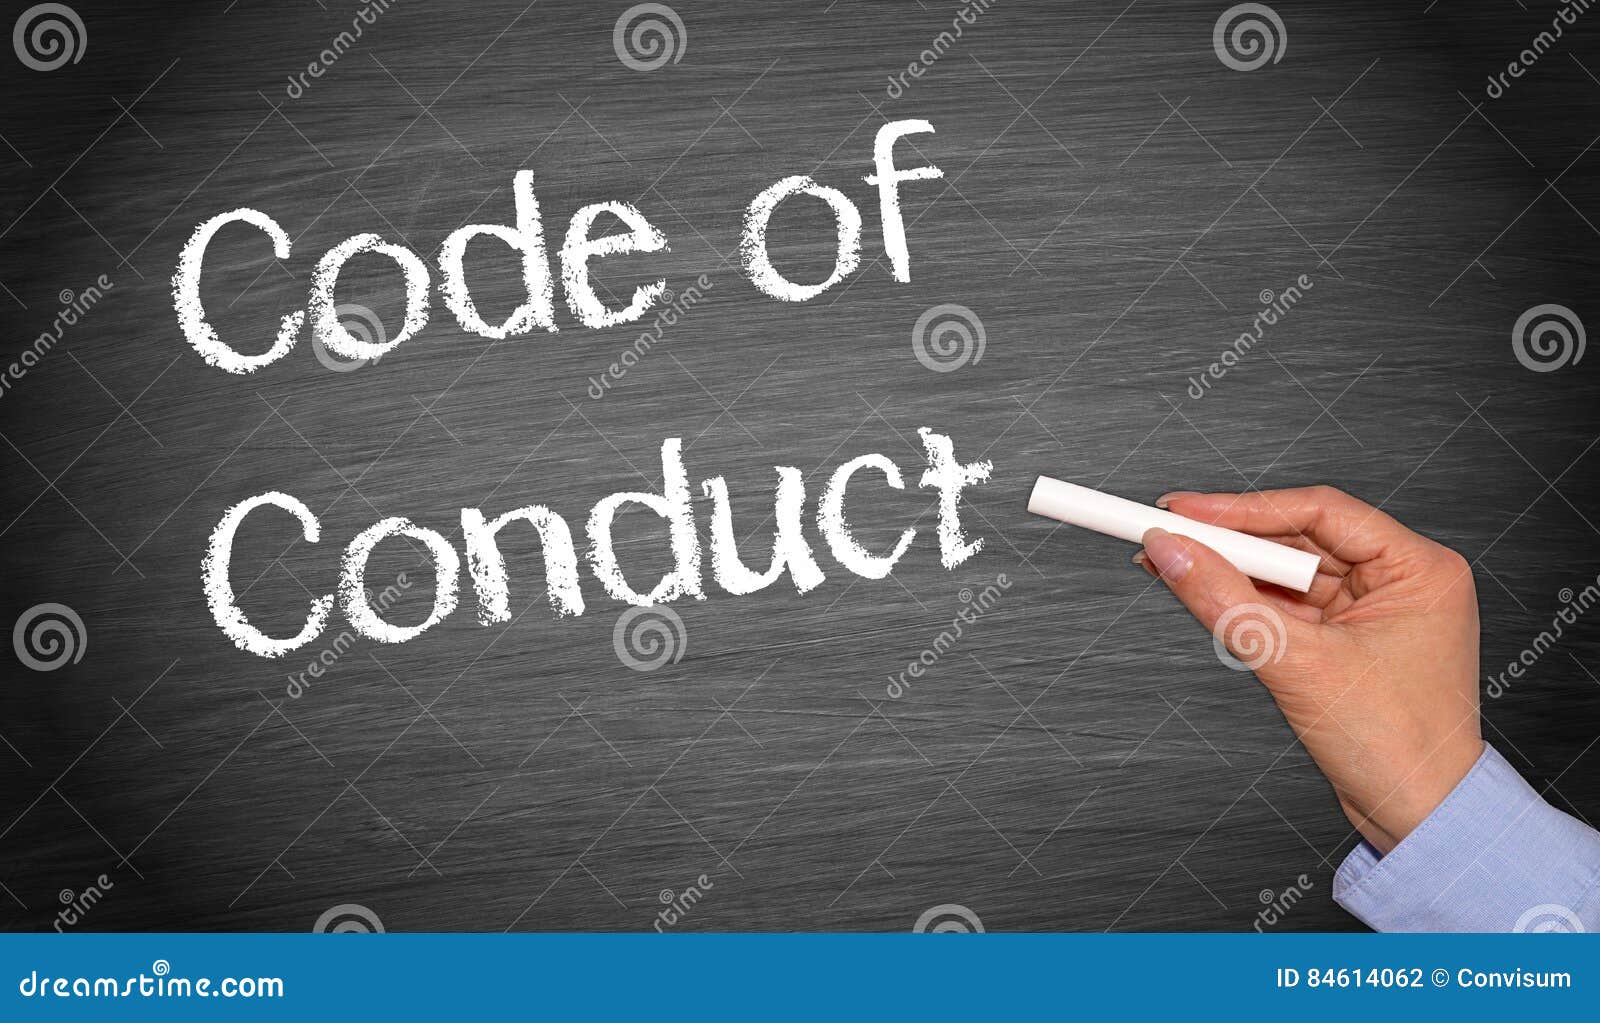 code of conduct chalkboard with female hand